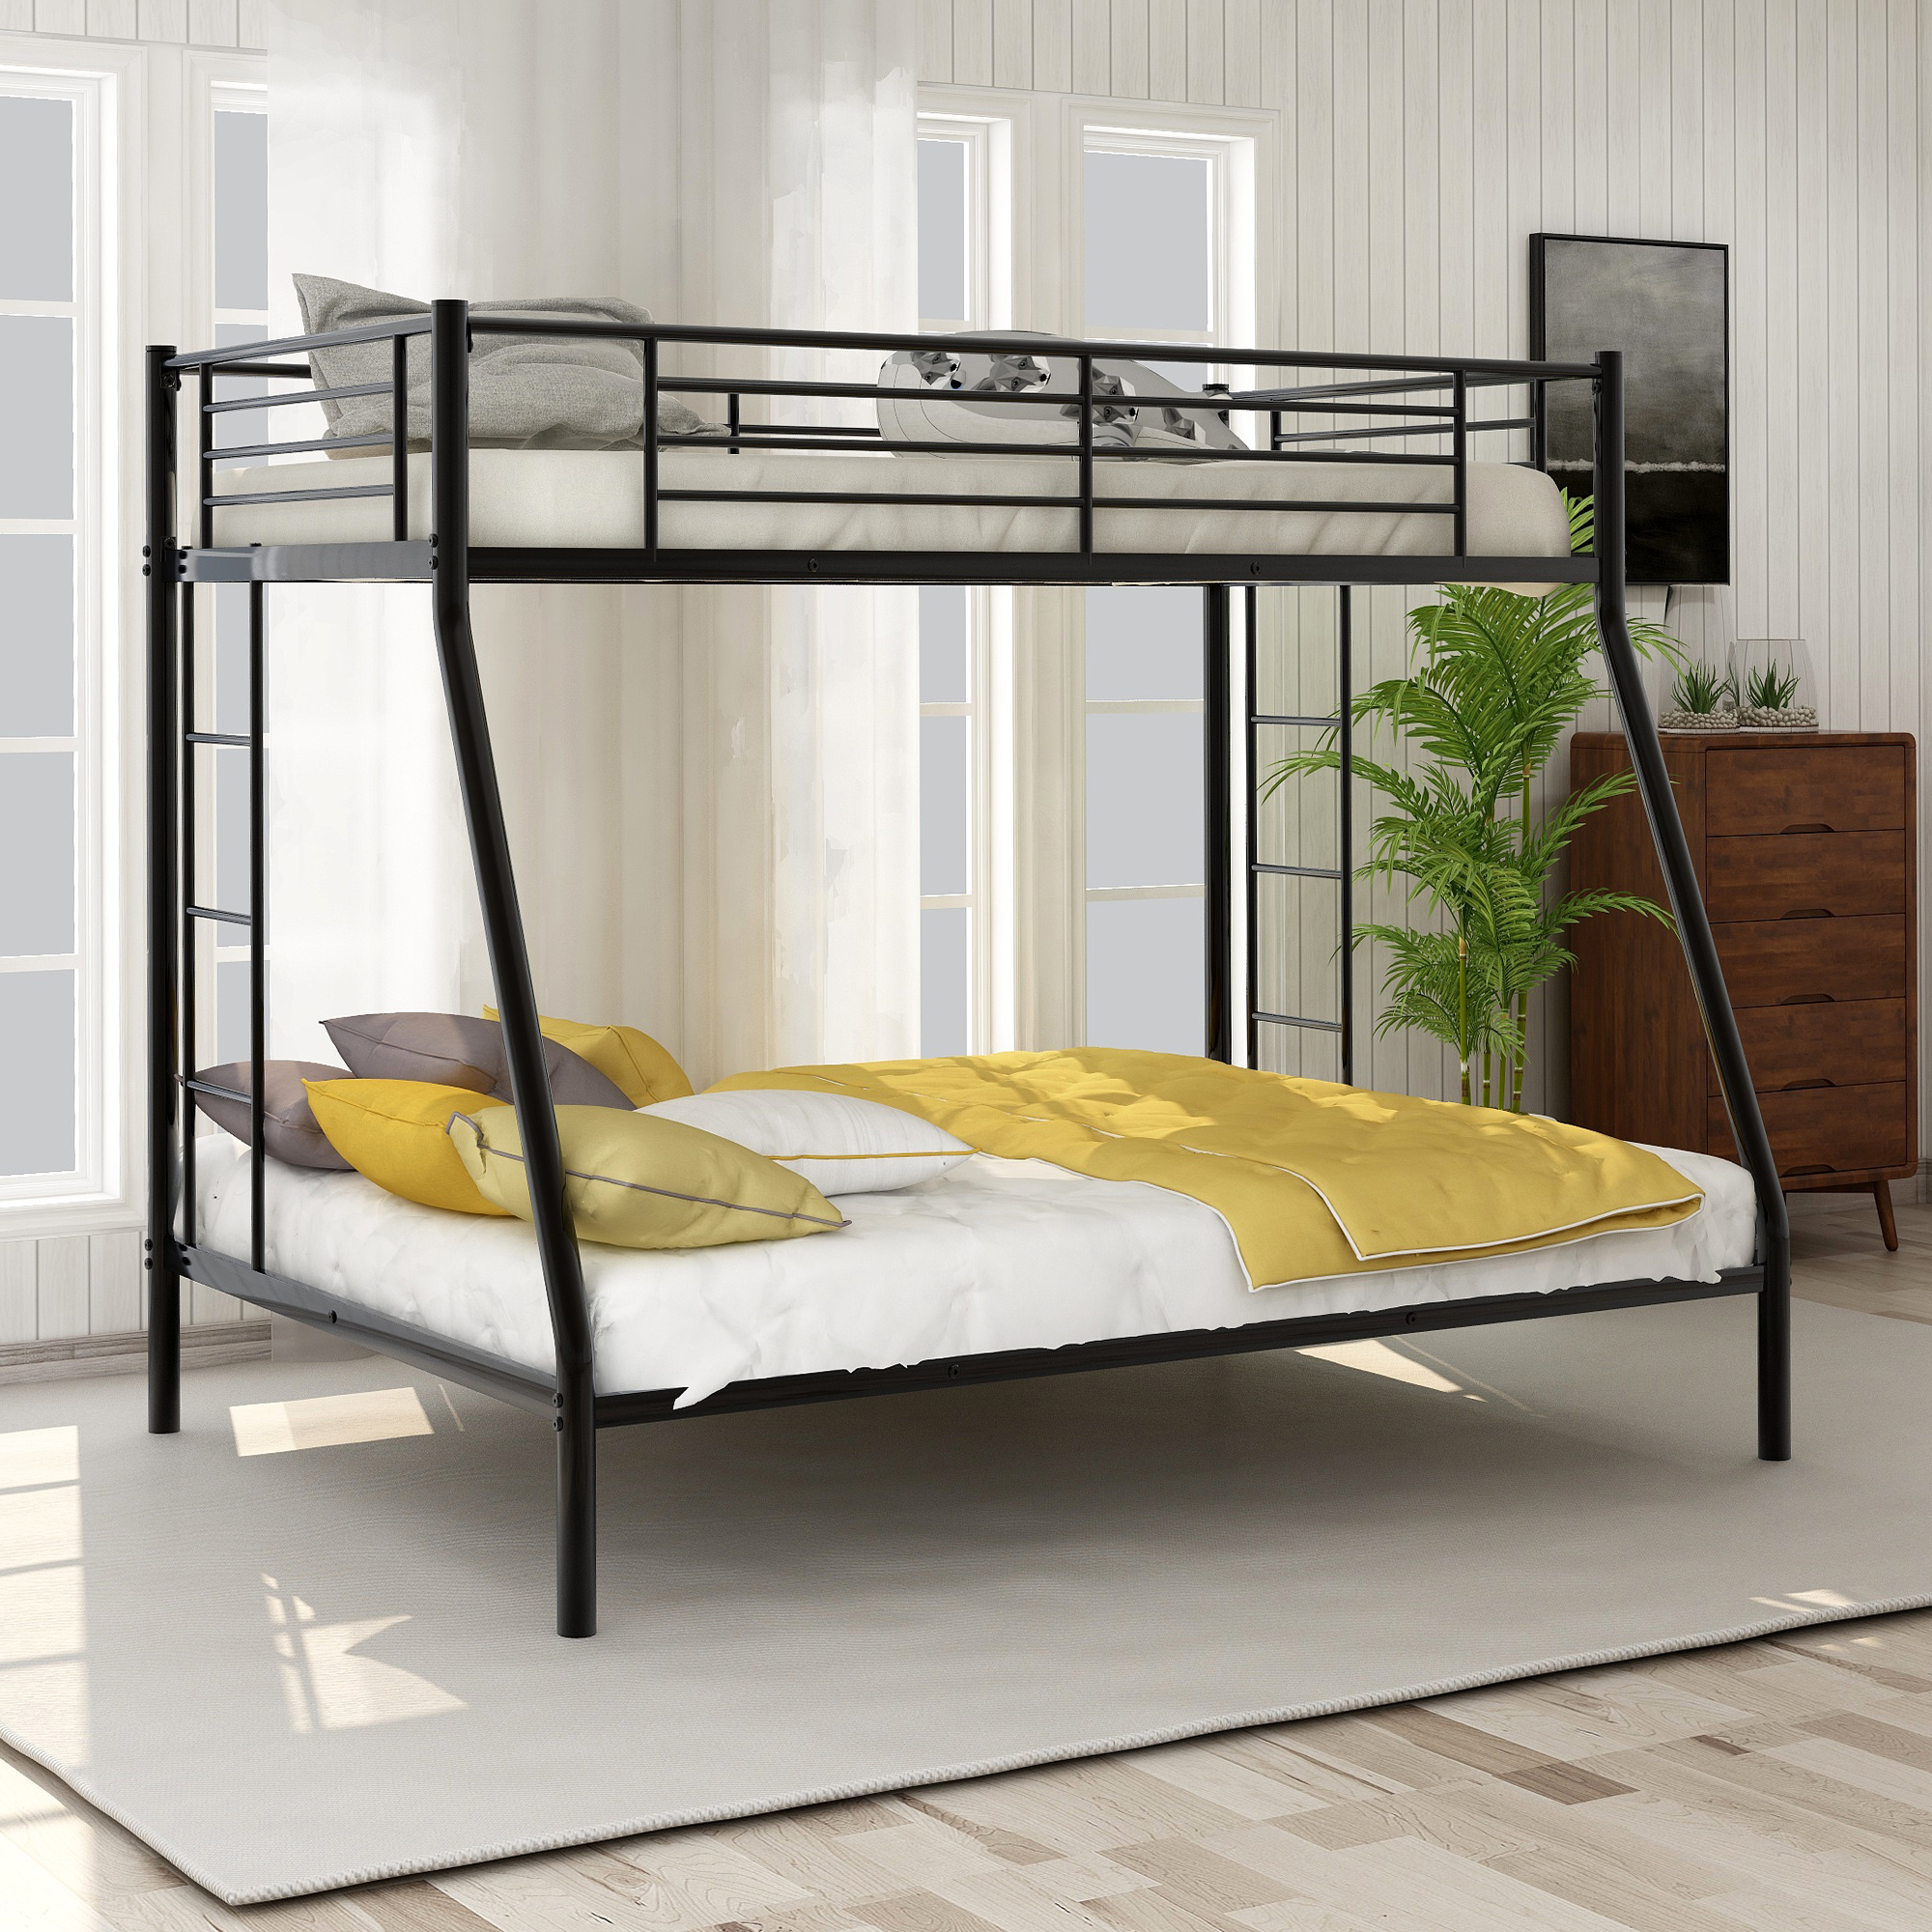 Twin Over Full Metal Bunk Bed, Colorful Metal Bunk Beds